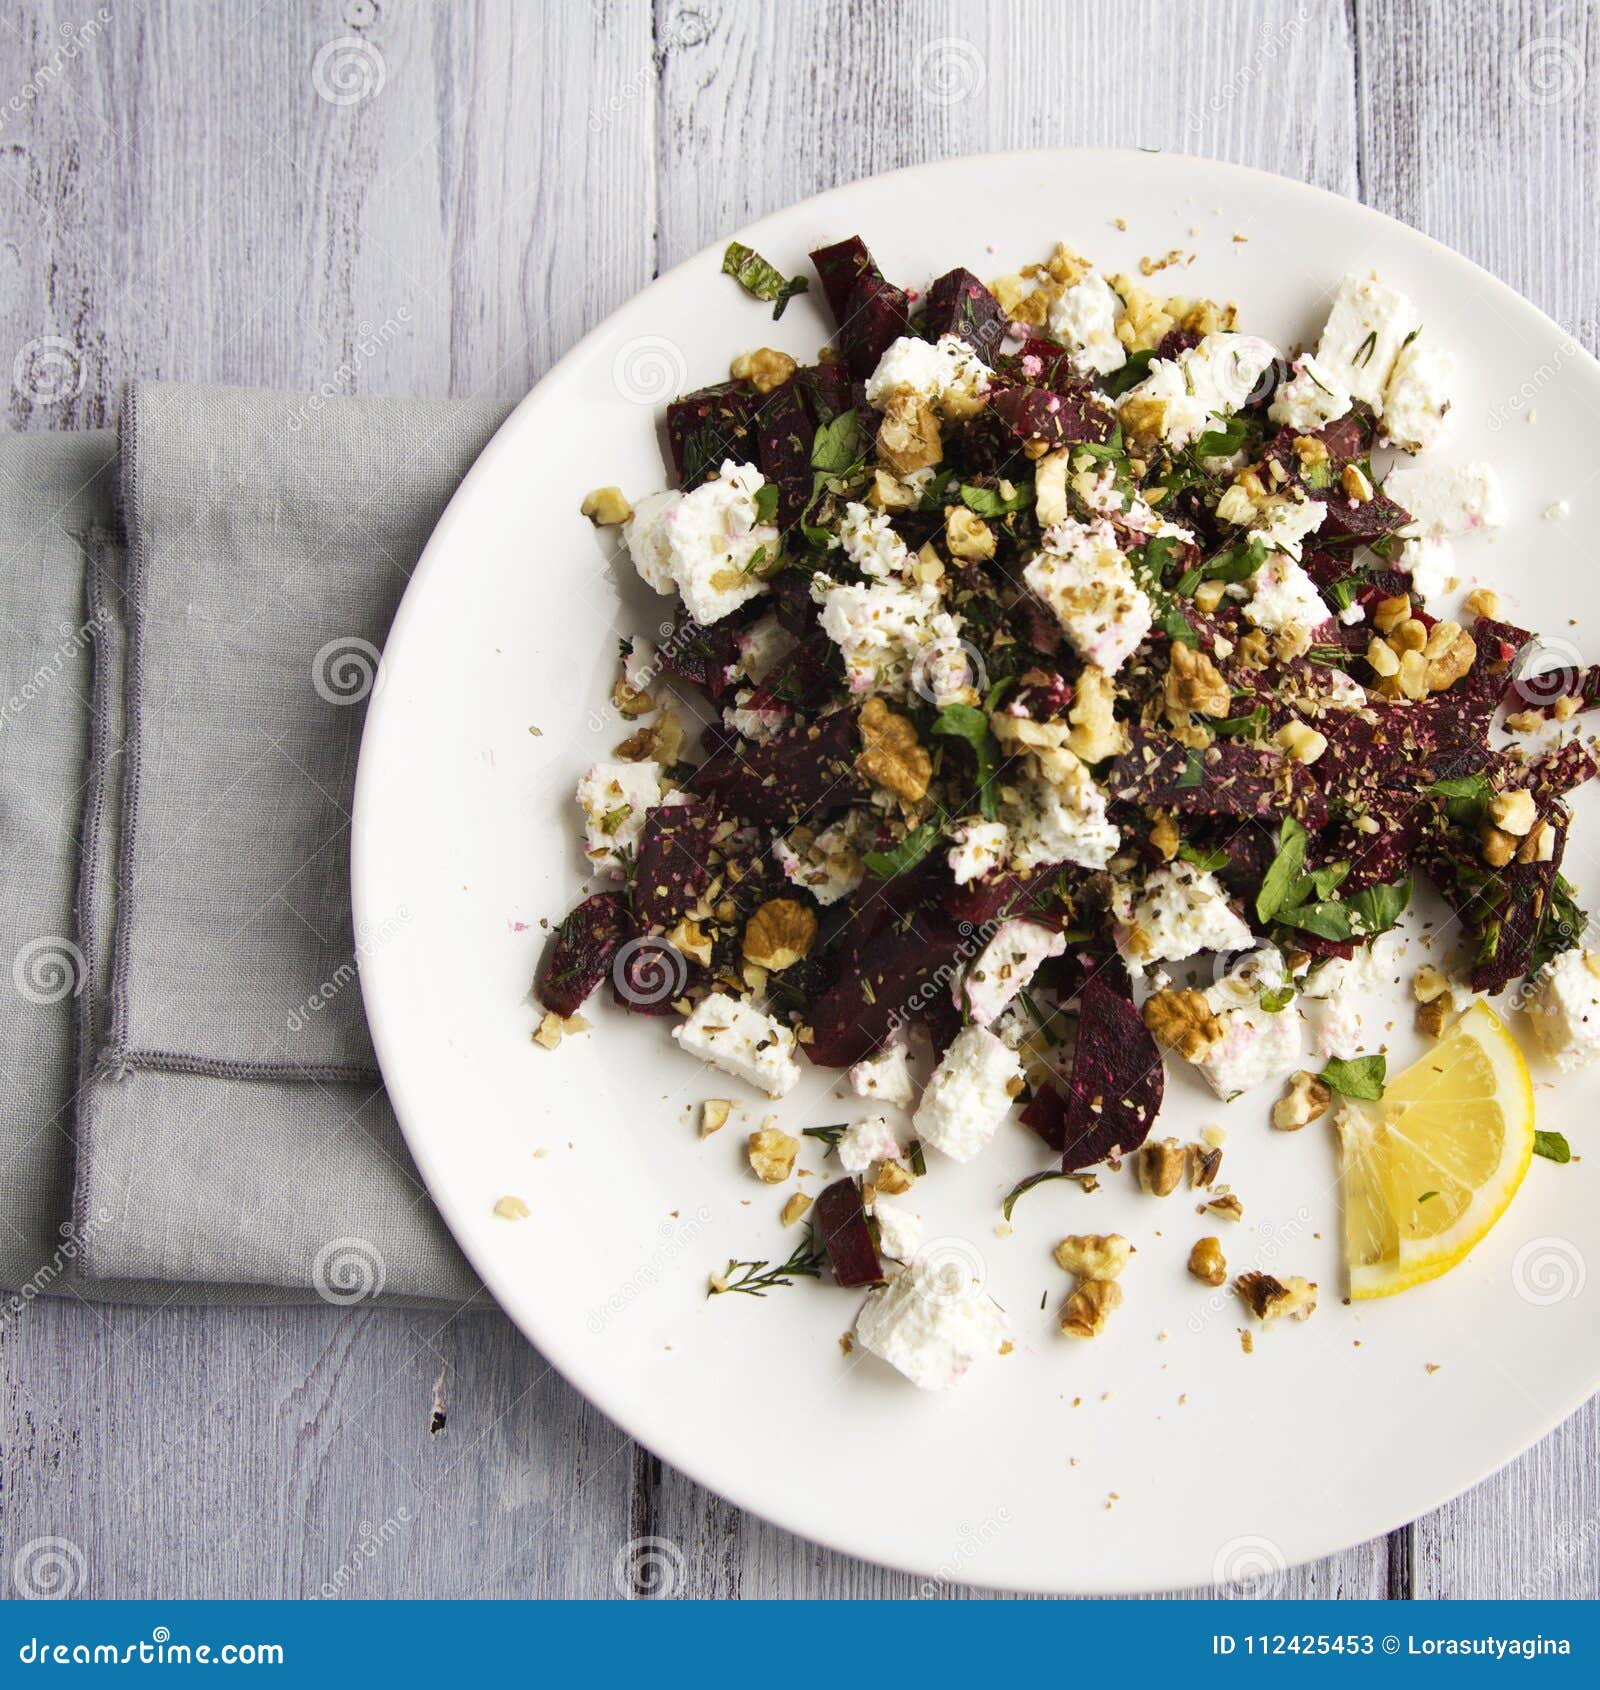 Beetroot Salad With Cottage Cheese And Walnuts Stock Image